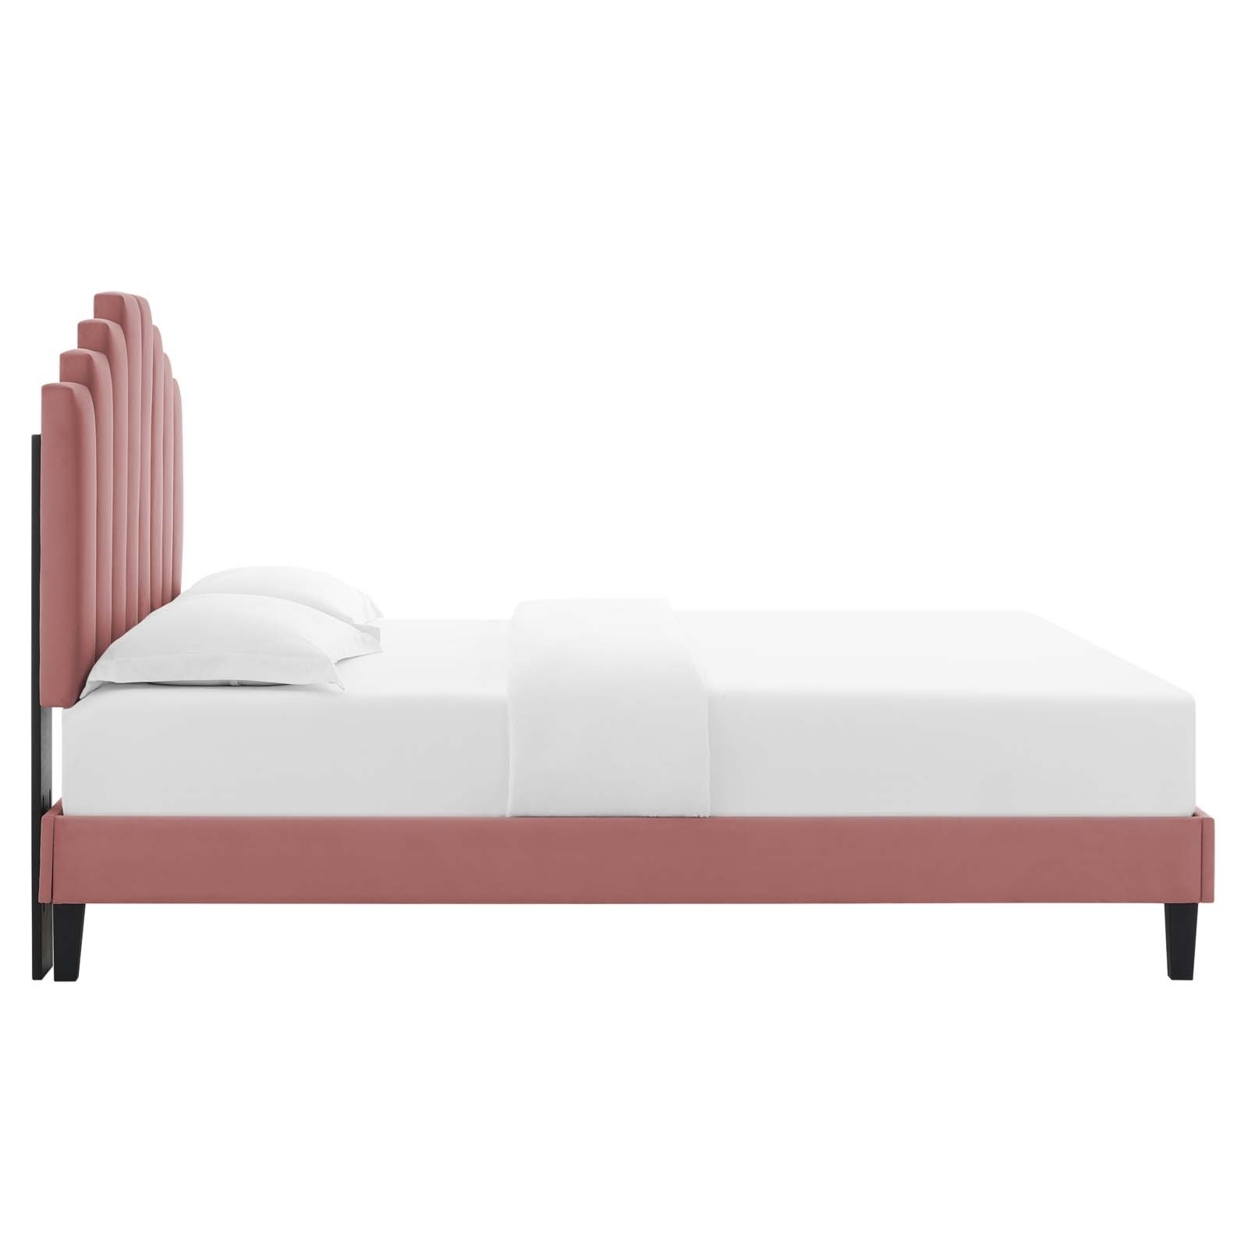 Channel Tufted Twin Platform Bed With Tapered Wood Leg, Pink, Saltoro Sherpi